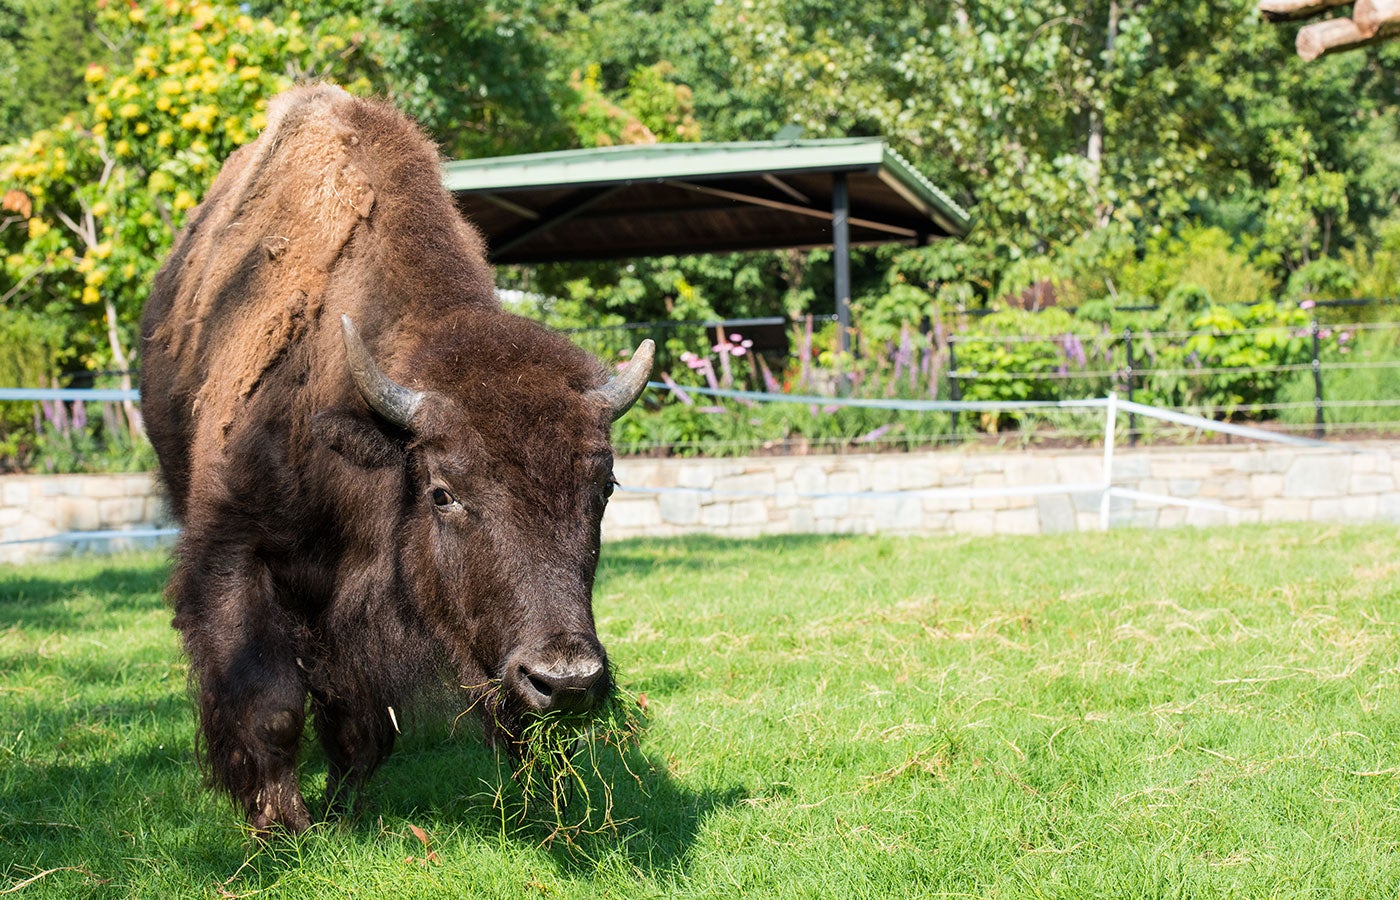 An American bison, sometimes called a buffalo, eats grass in the Smithsonian's National Zoo's American bison yard